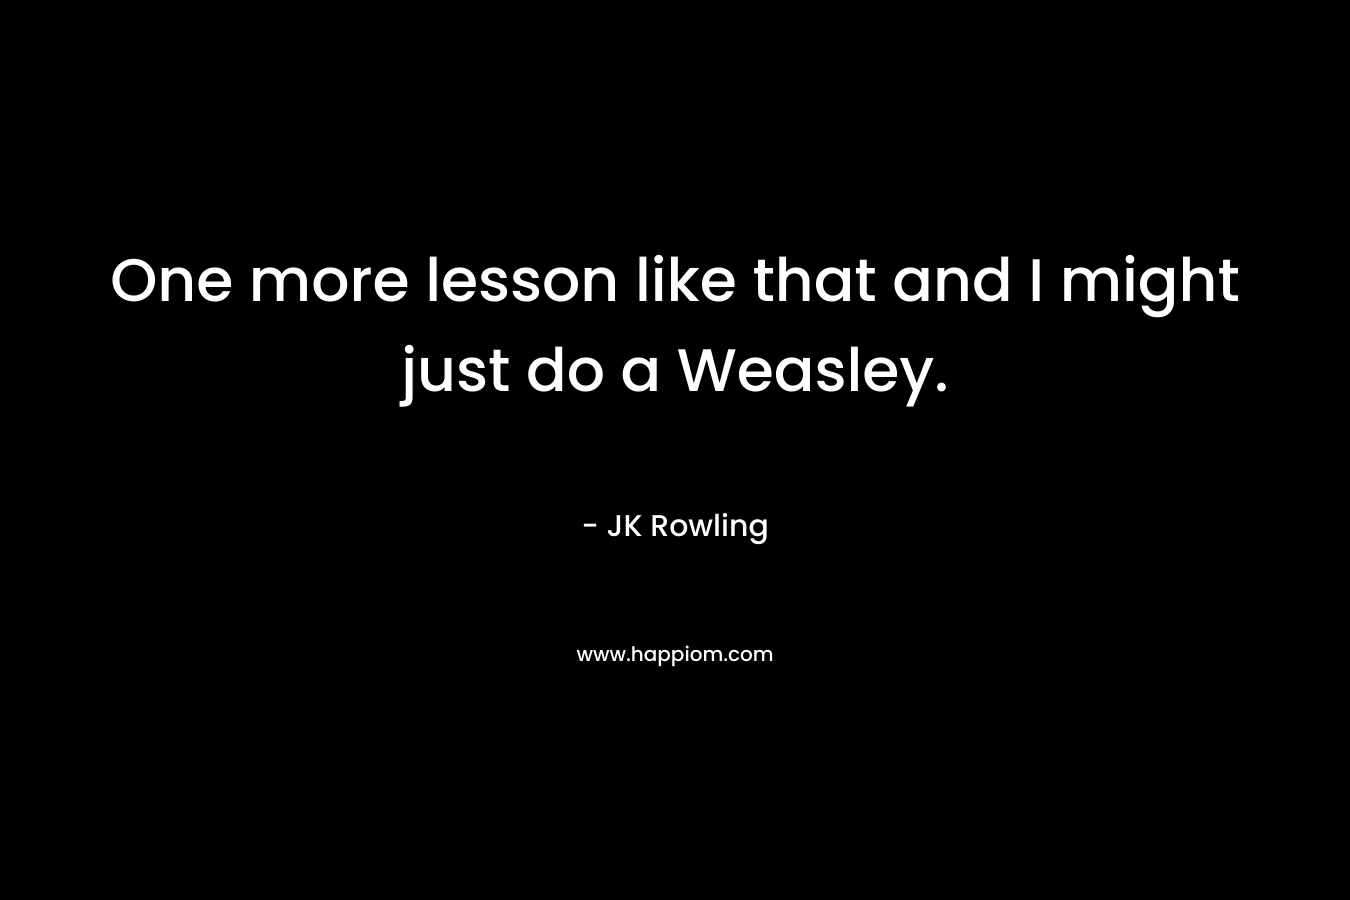 One more lesson like that and I might just do a Weasley.